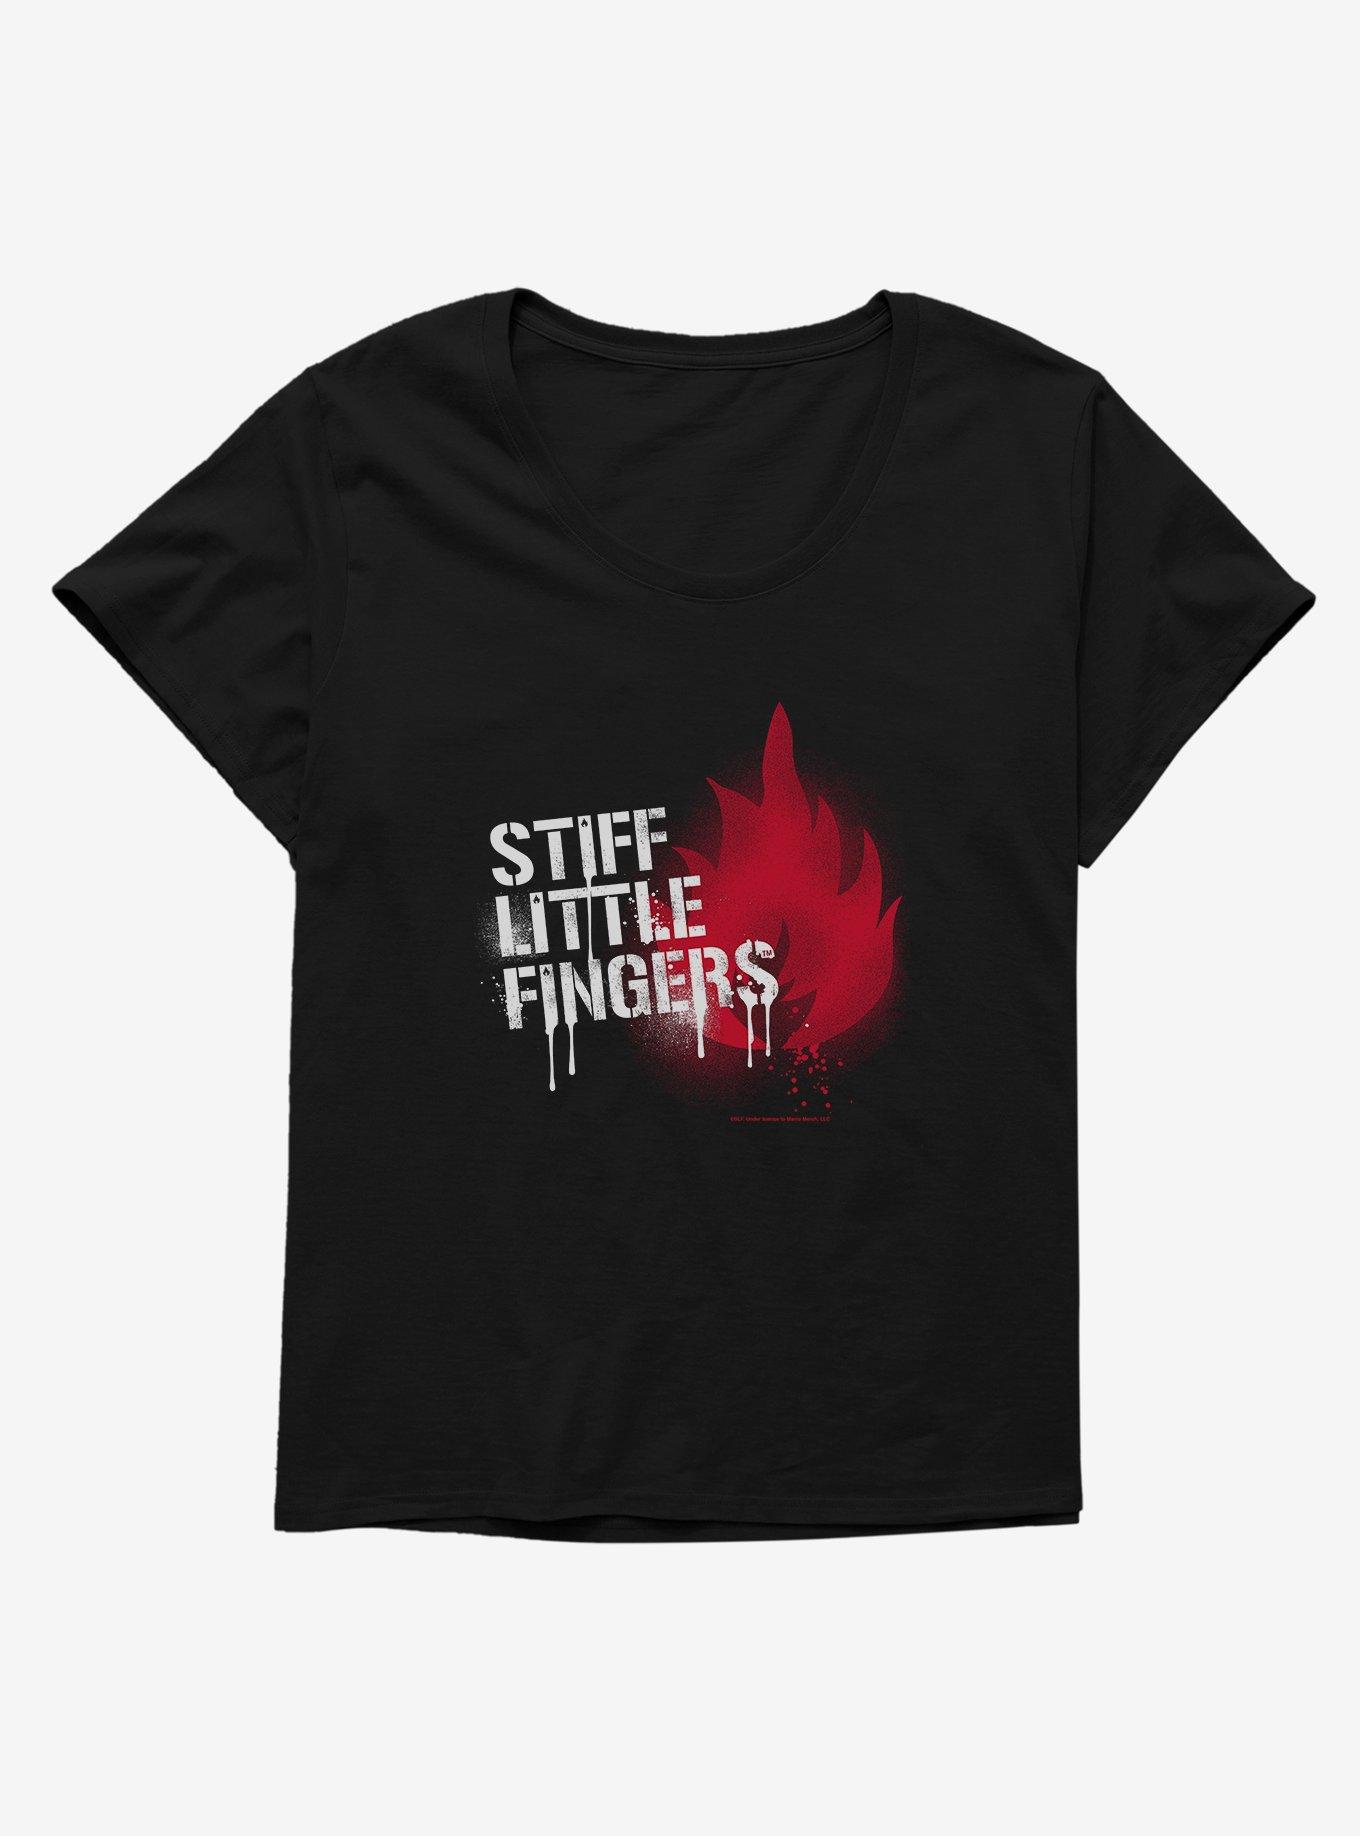 Stiff Little Fingers Inflammable Material Girls T-Shirt Plus Size, BLACK, hi-res